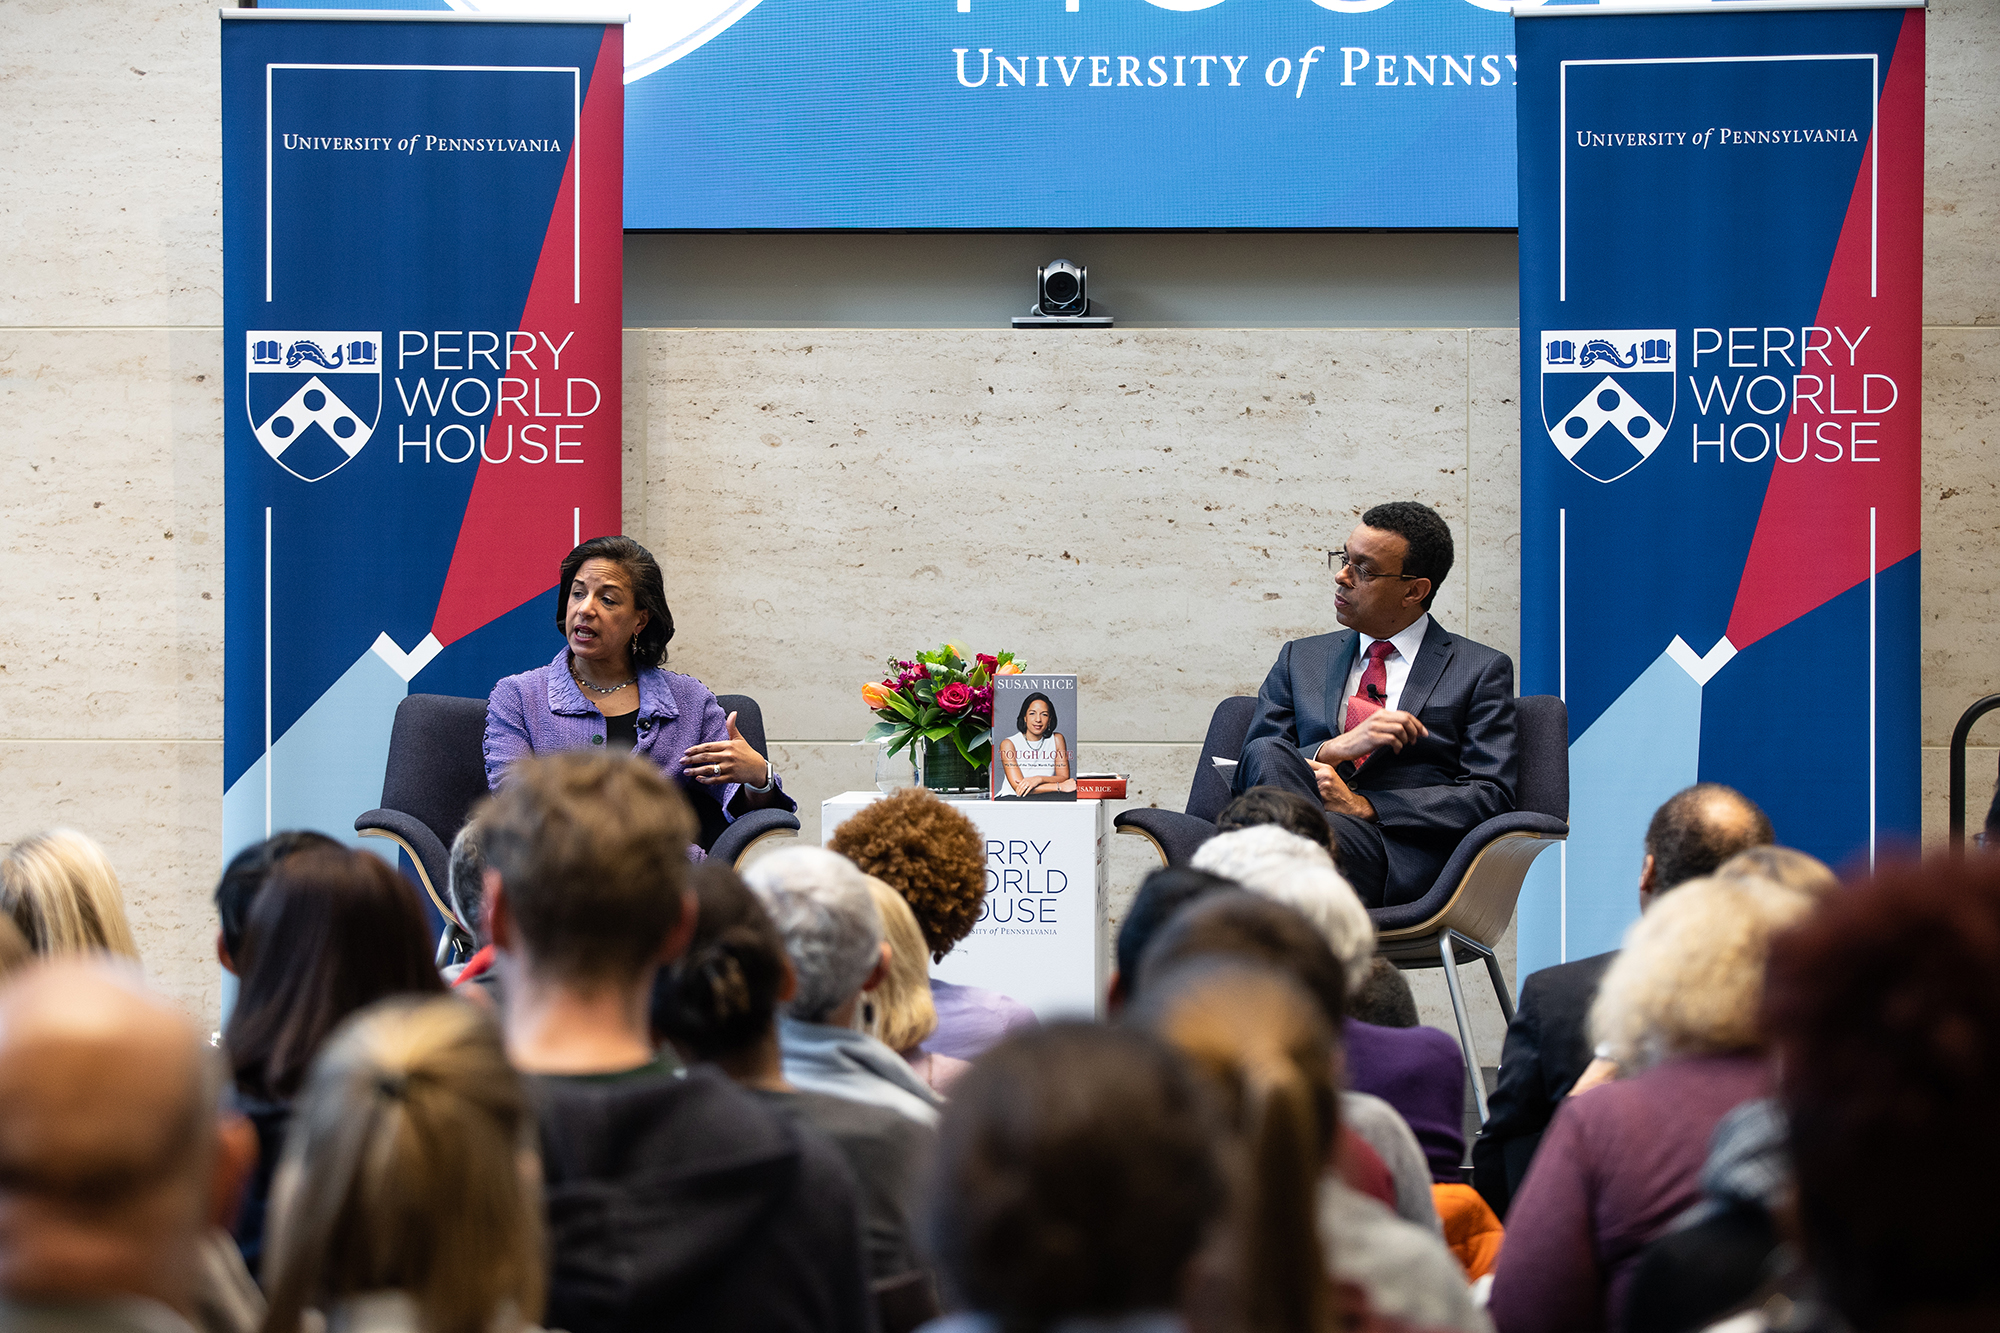 Susan Rice on stage at Perry World House with Provost Wendell Pritchett